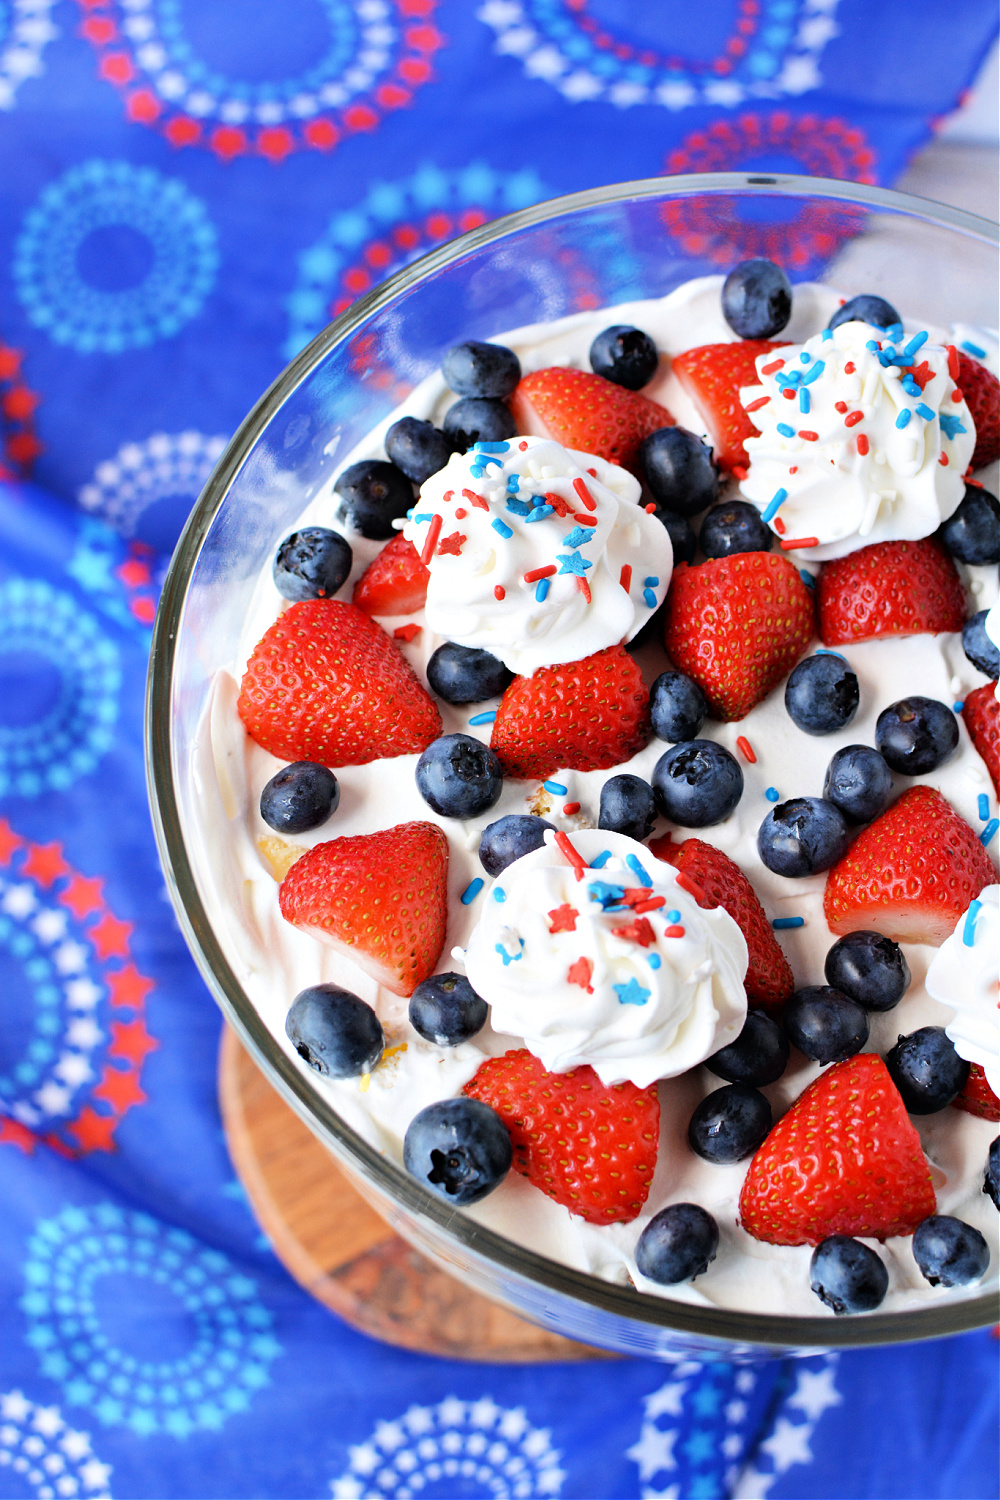 Red White and Blue Cheesecake Trifle Recipe